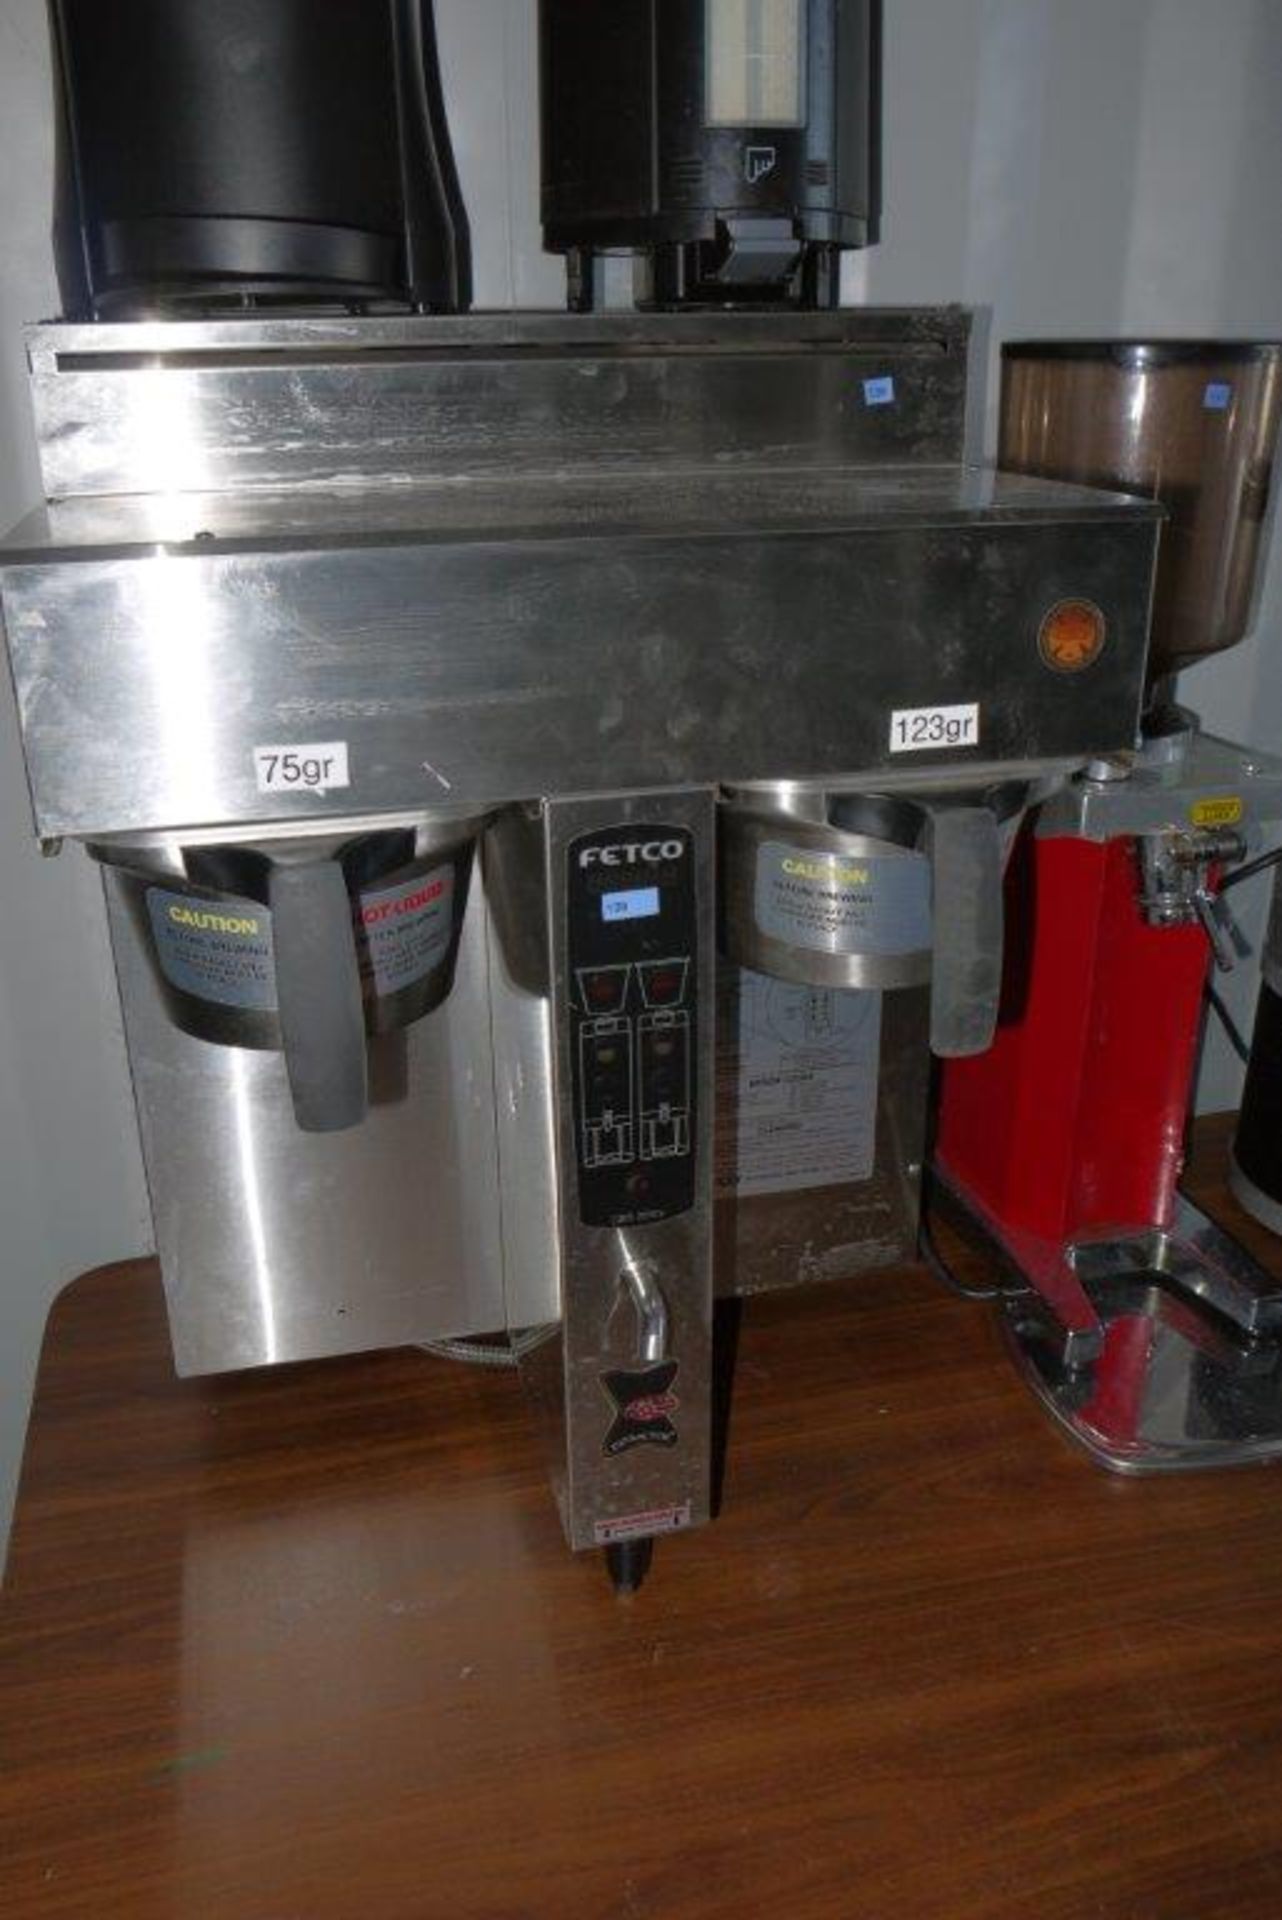 2013 FETCO DOUBLE STATION COFFEE BREWER, MODEL CBS 2032E, S/N 720143138478, SINGLE PHASE, C/W - Image 4 of 9